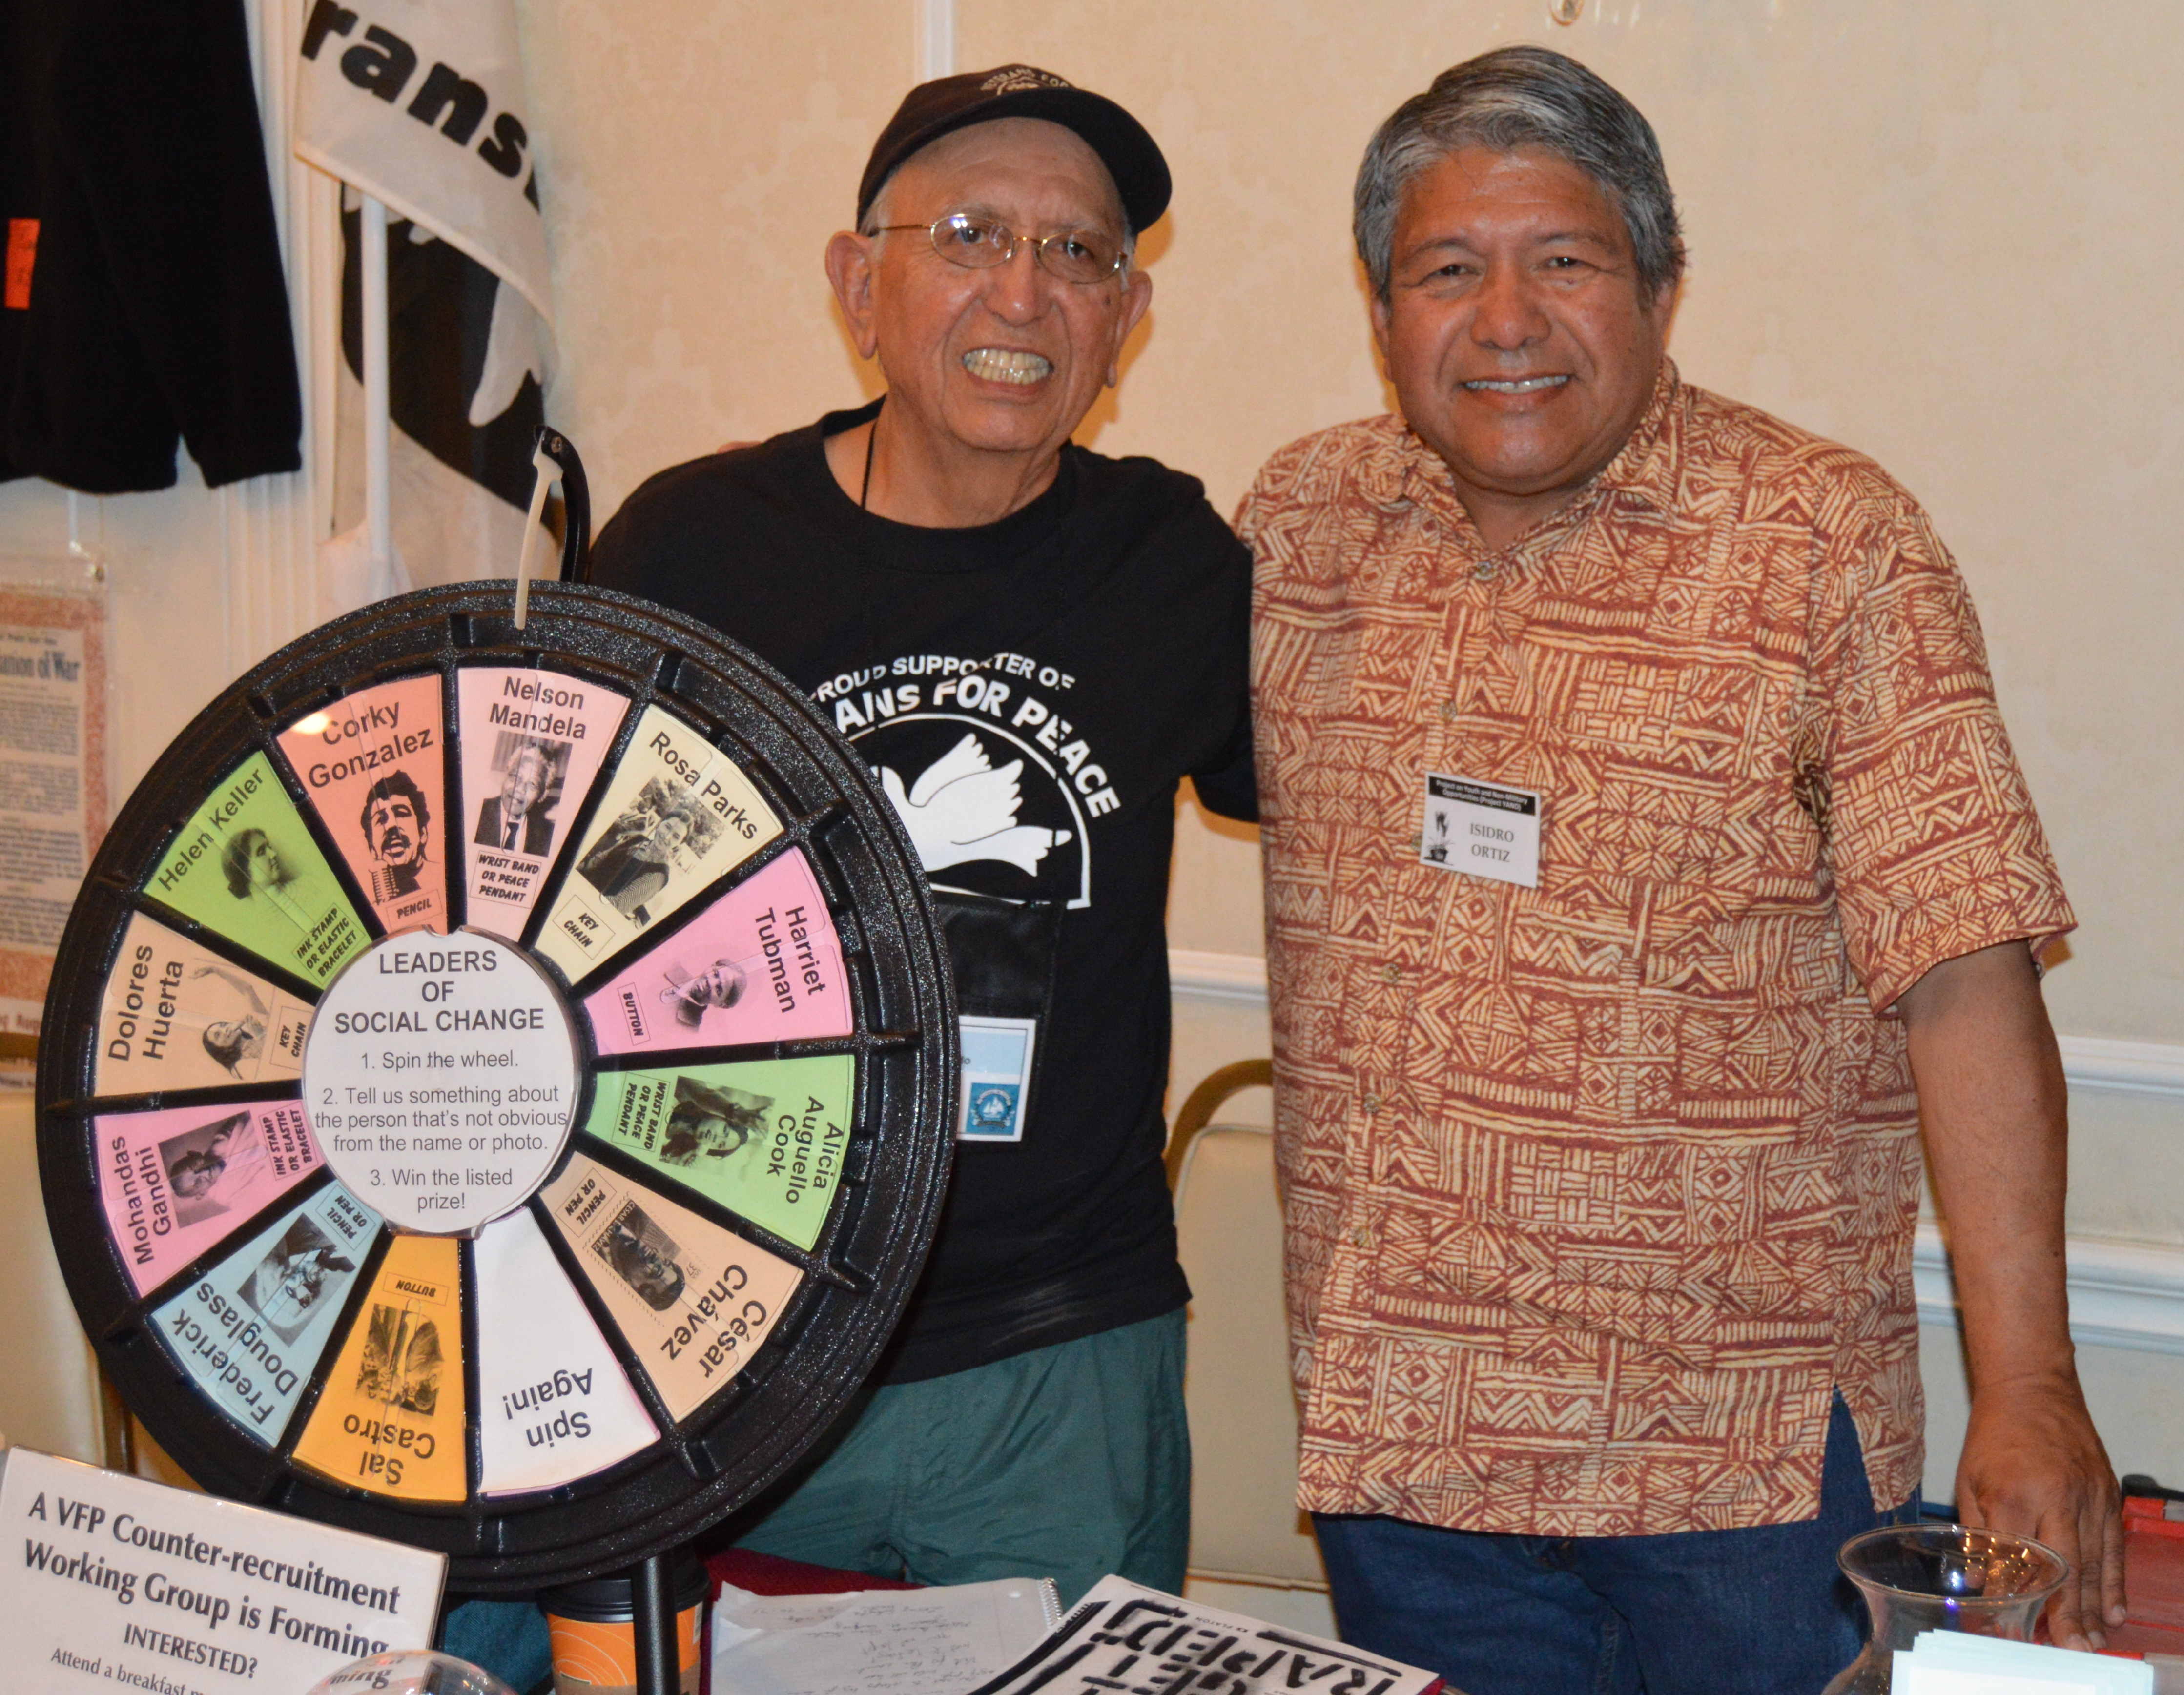  Gilberto (left) with Isidro Ortiz at the Veterans For Peace convention, San Diego, CA, August 8, 2015. Photo: Project YANO.